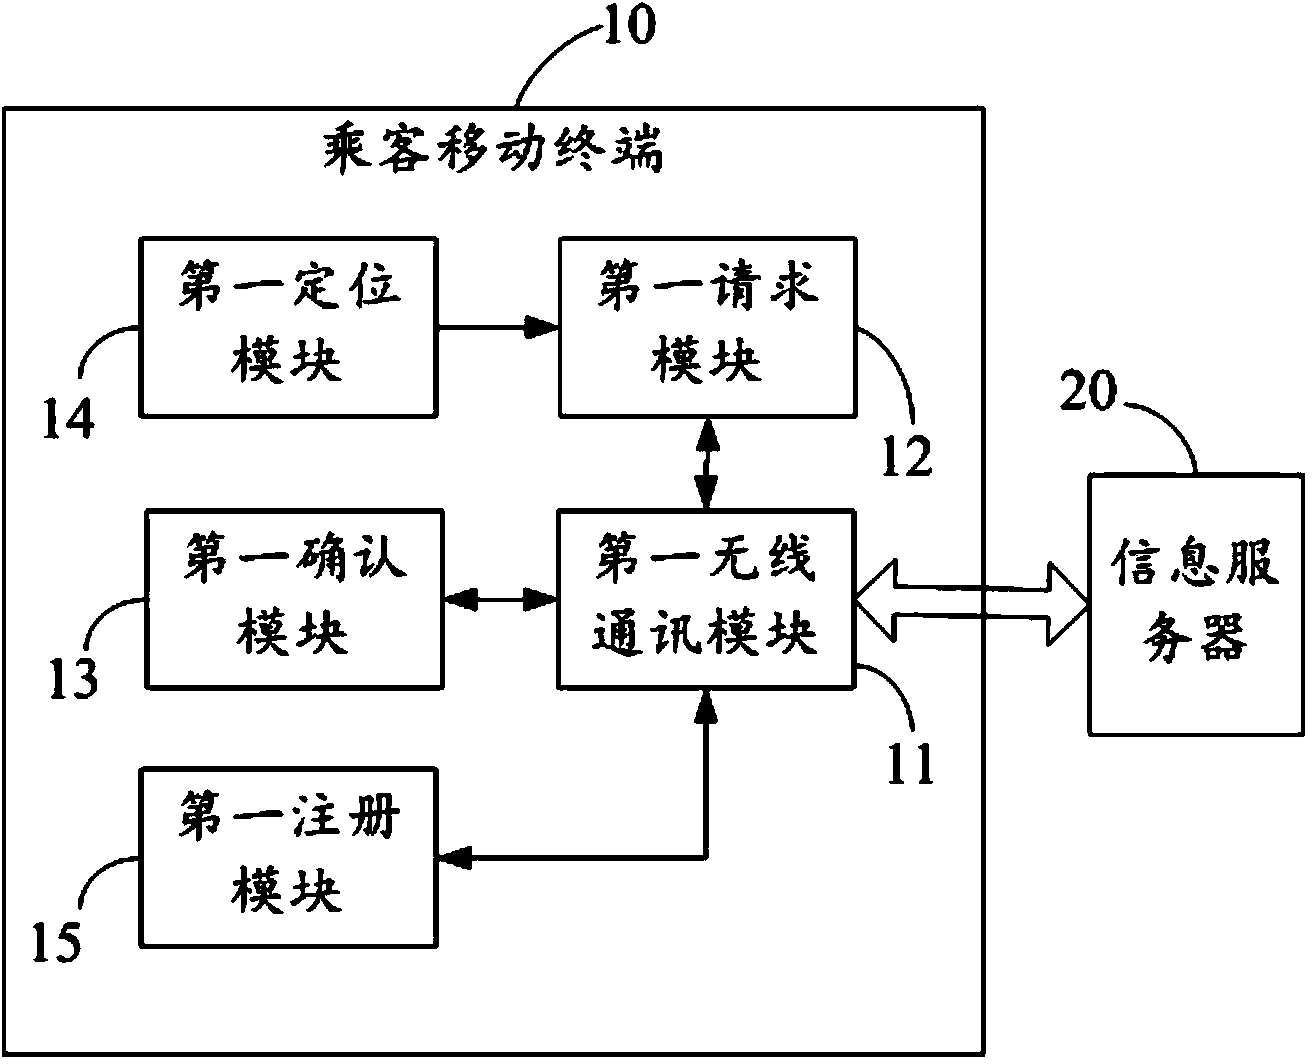 Taxi calling and sharing method and system